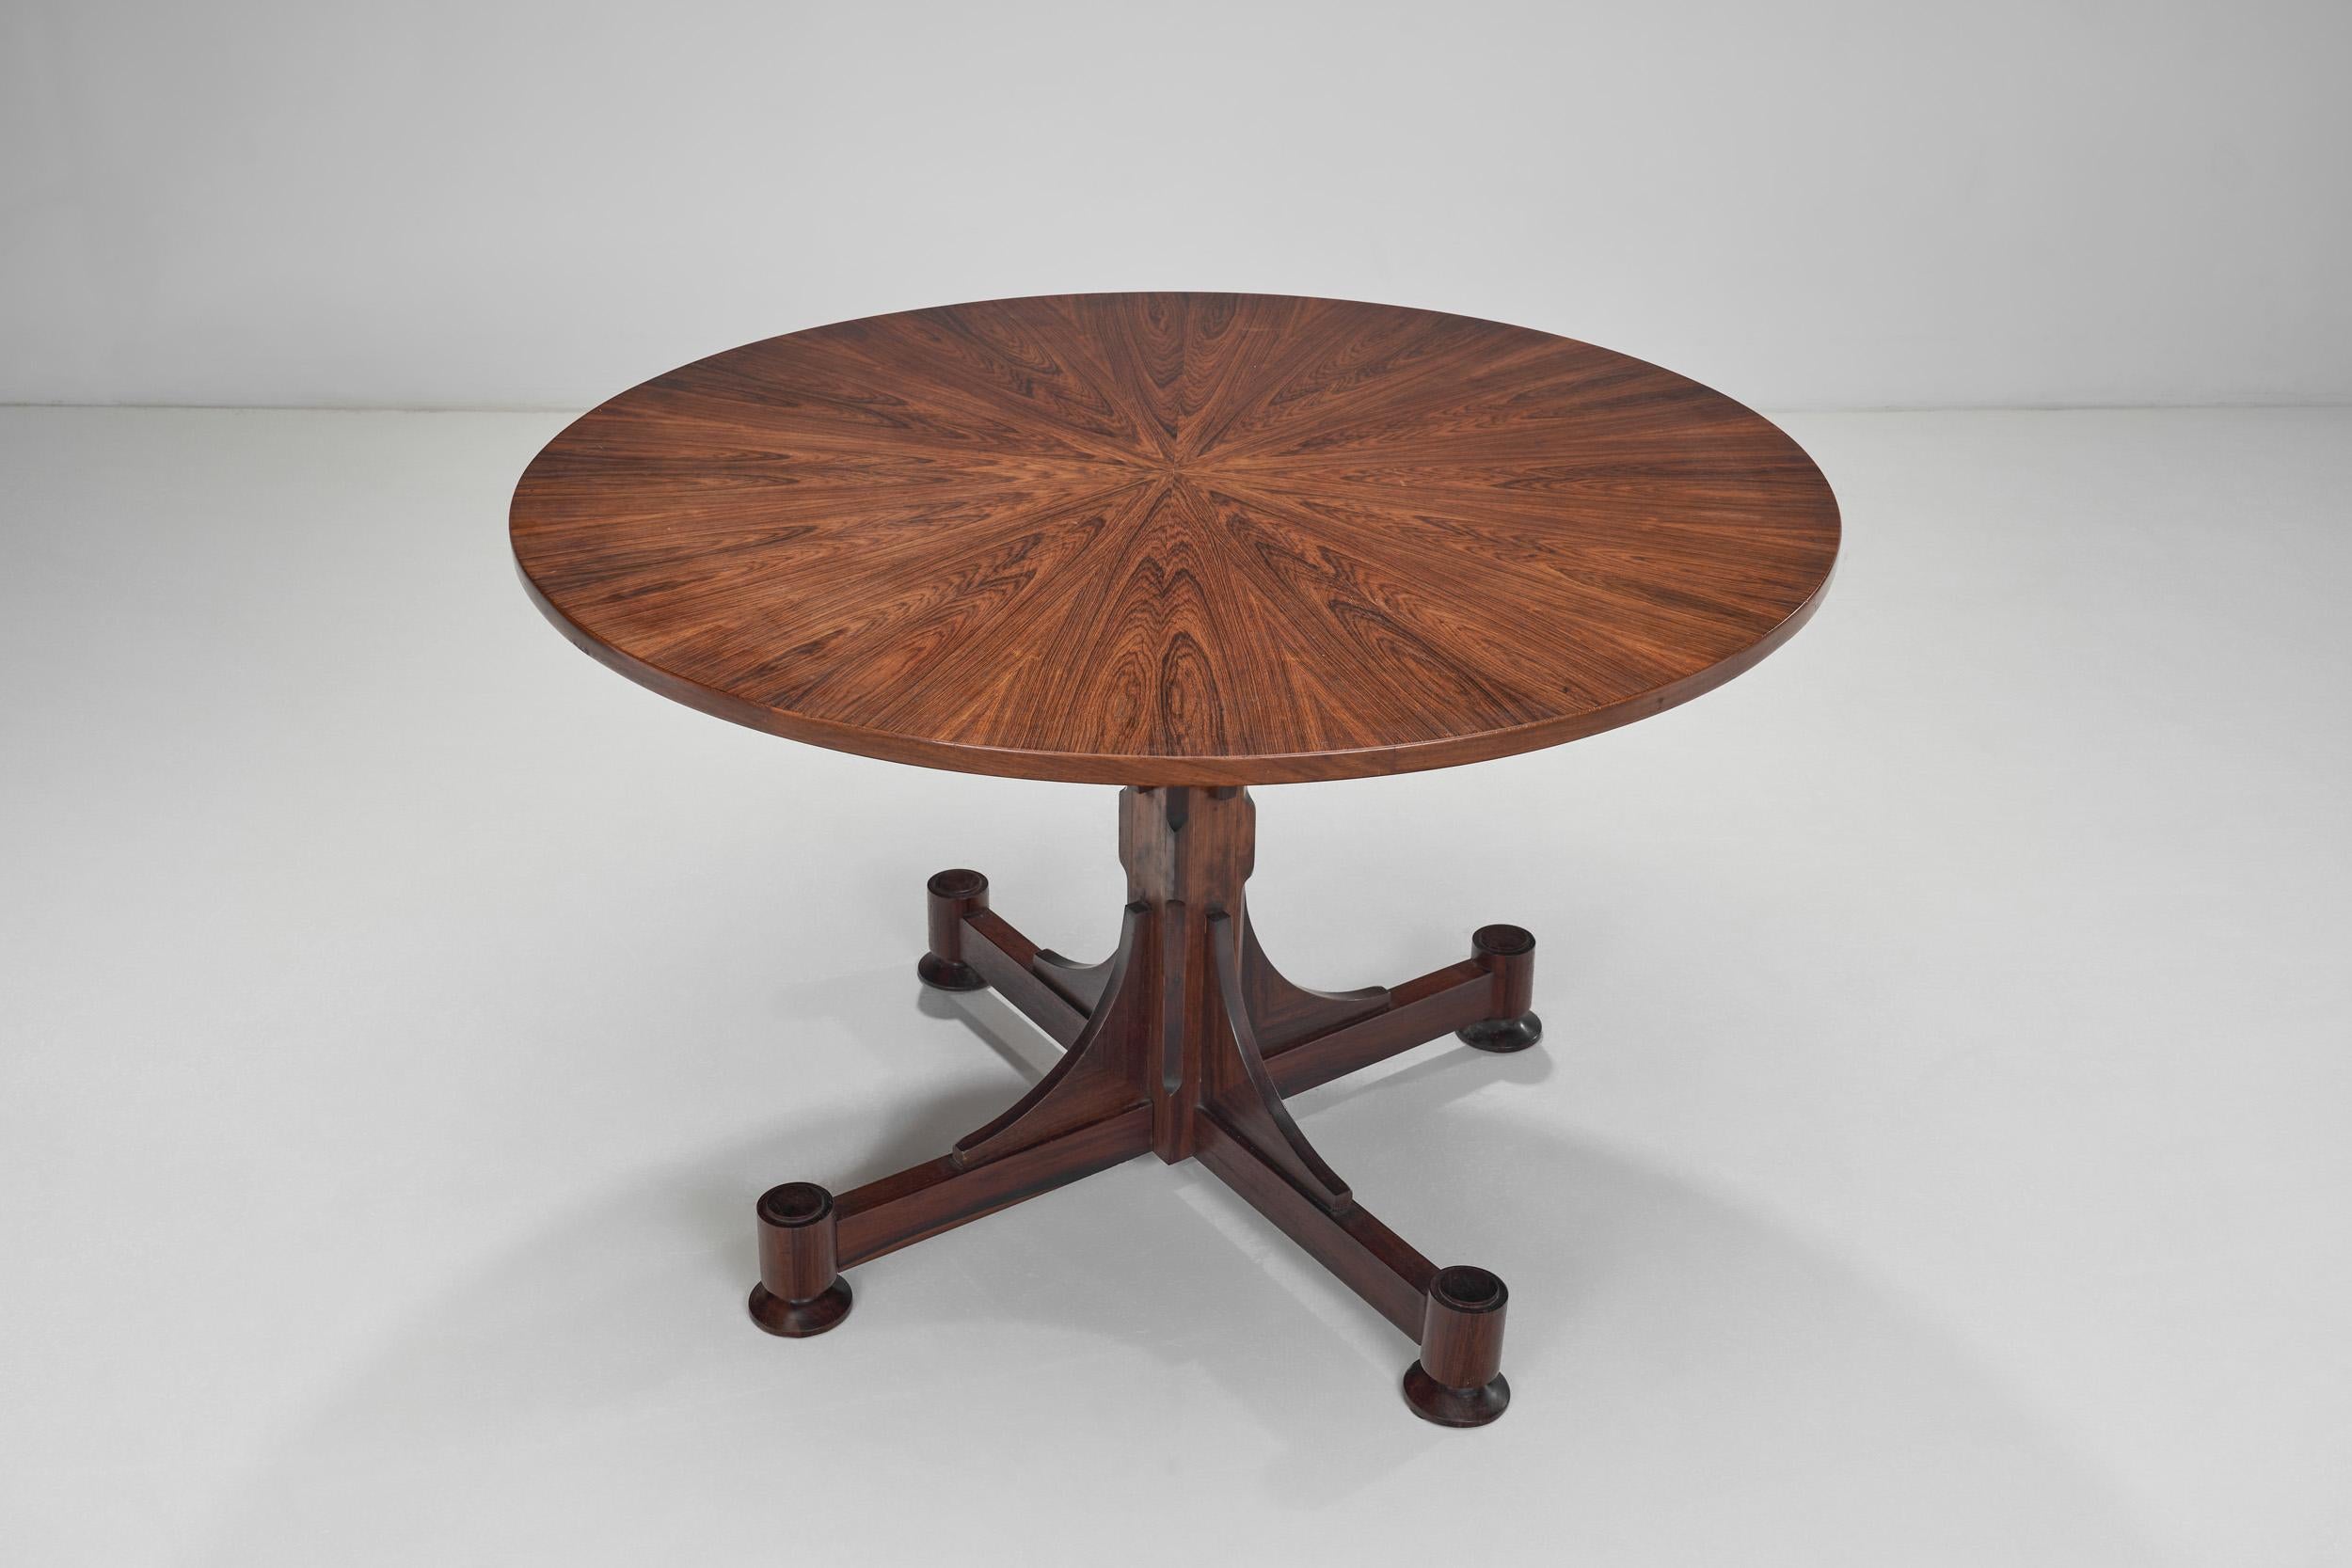 Mid-20th Century Sunburst Top Dining Table by Gianni Moscatelli for ARREDOFORM, Italy ca 1965